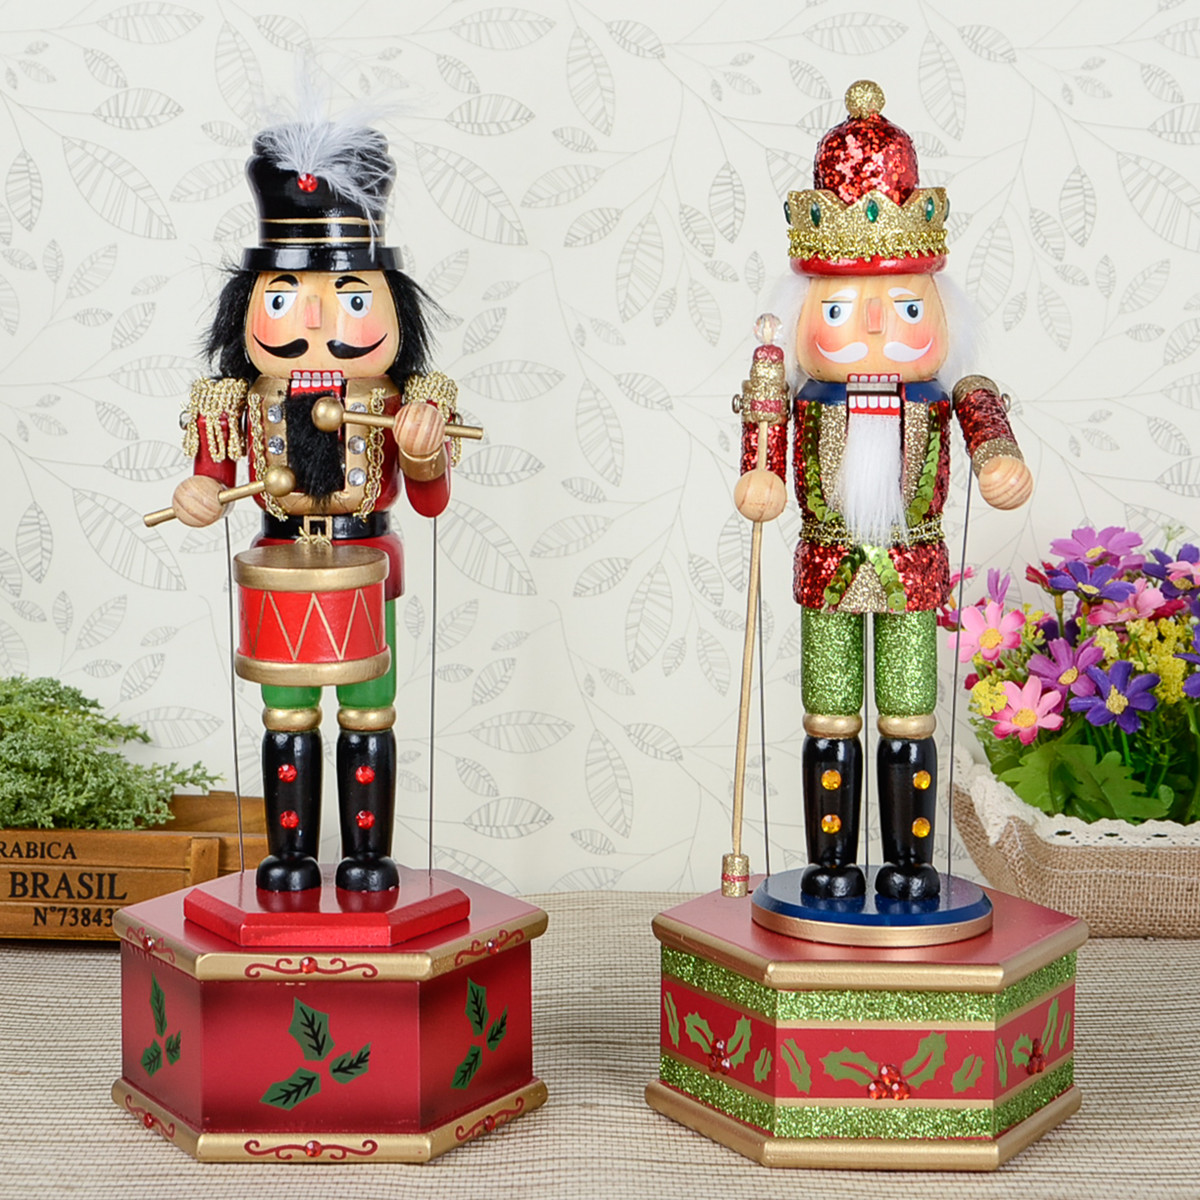 32cm-Wooden-Music-Box-Nutcracker-Doll-Soldier-Vintage-Handcraft-Decoration-Christmas-Gifts-1398446-1